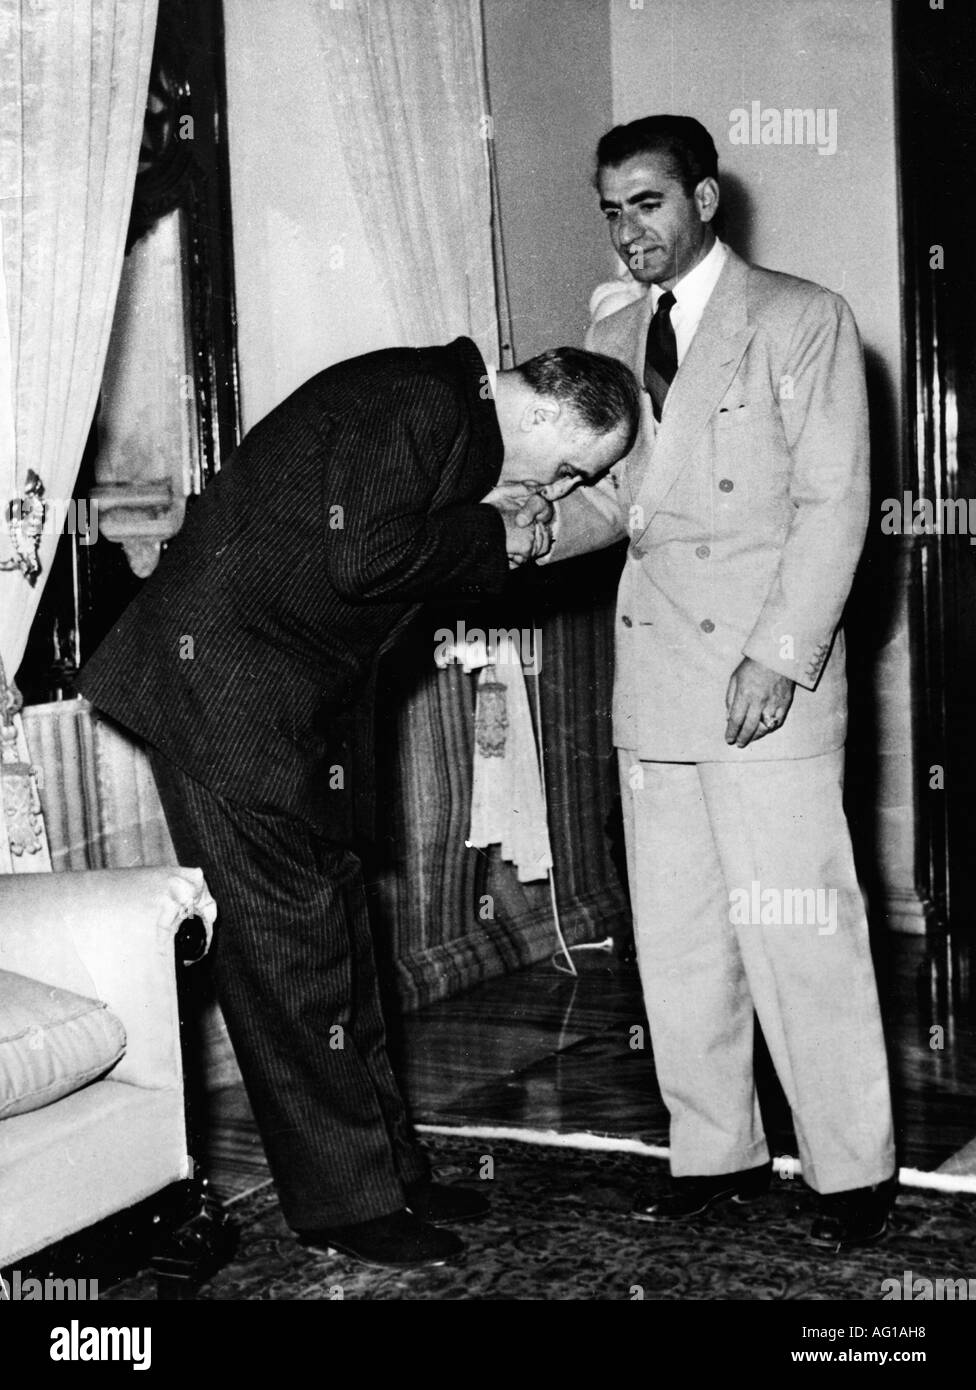 Zahedi, Fazlollah, 1897 - 2.9.1963, Iranian general and politician, Prime Minister of Iran, with Shah Muhammed Reza Pahlawi in the White Palace in Tehran, 7.4.1955, Stock Photo